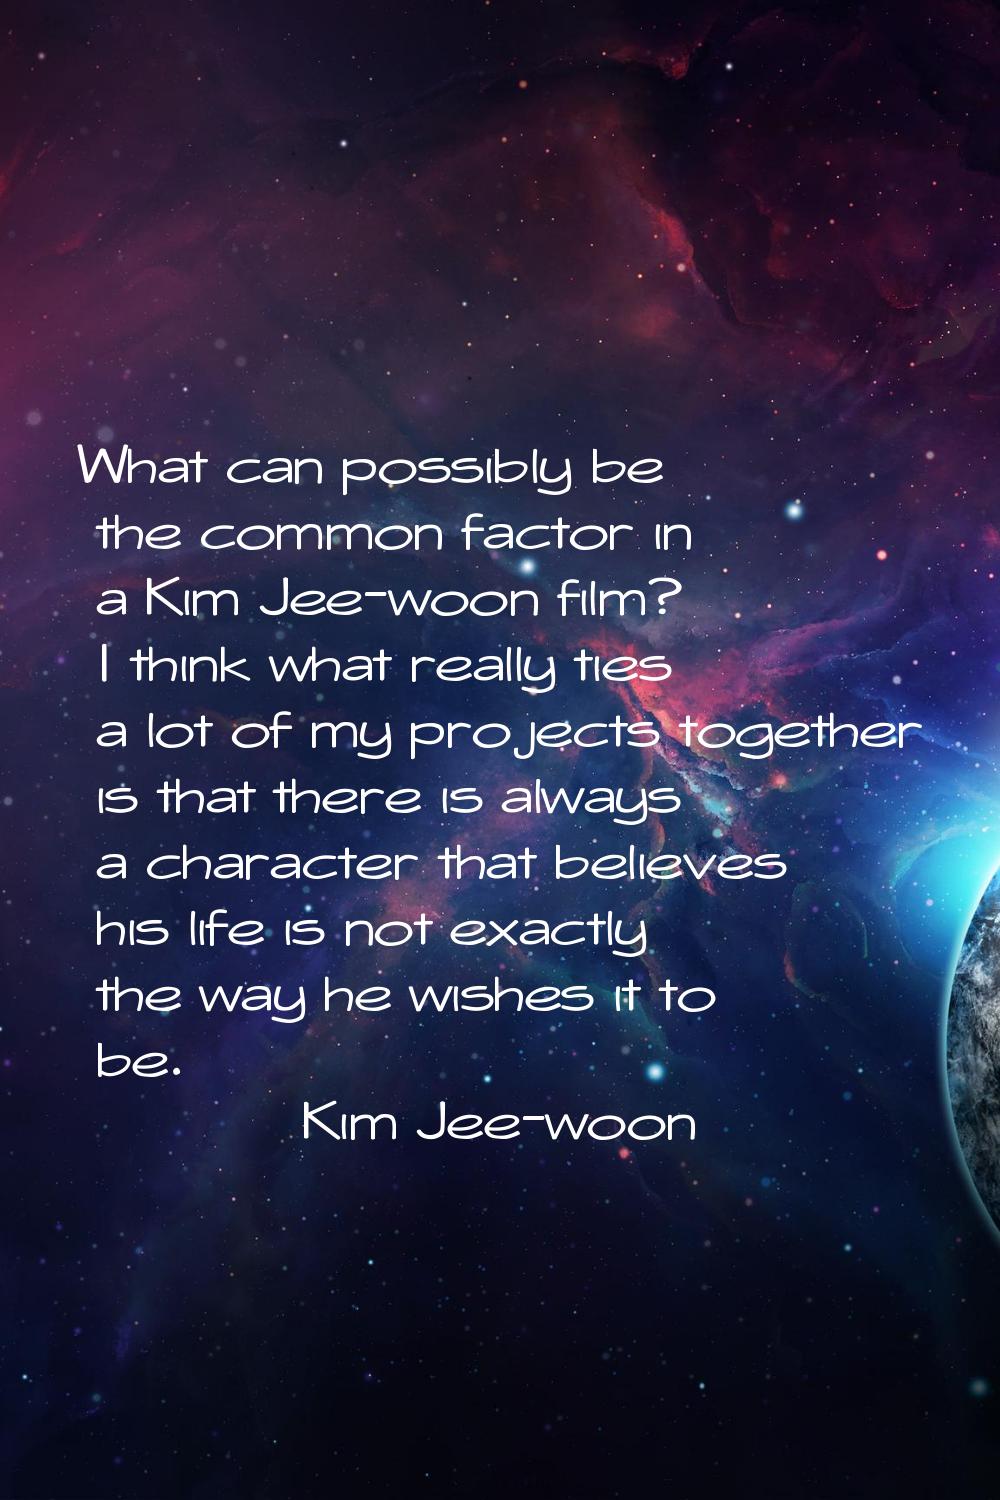 What can possibly be the common factor in a Kim Jee-woon film? I think what really ties a lot of my